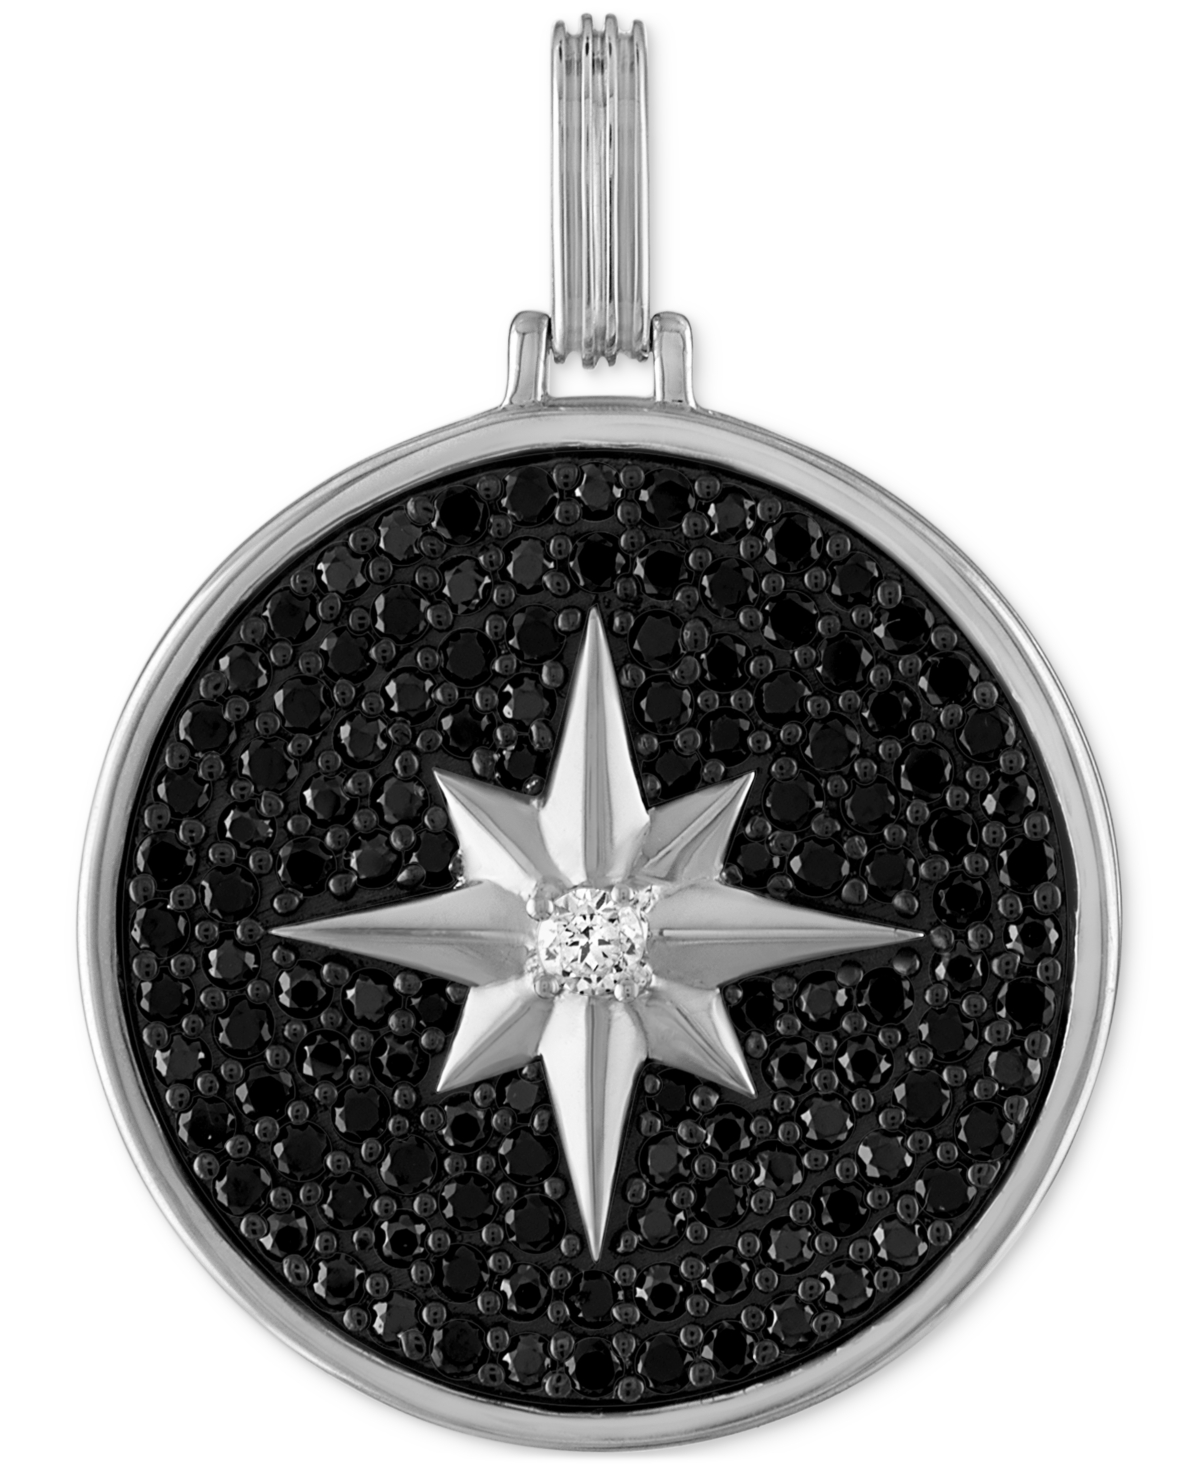 Esquire Men's Jewelry Black Spinel & Cubic Zirconia North Star Disc Pendant In Sterling Silver, Created For Macy's